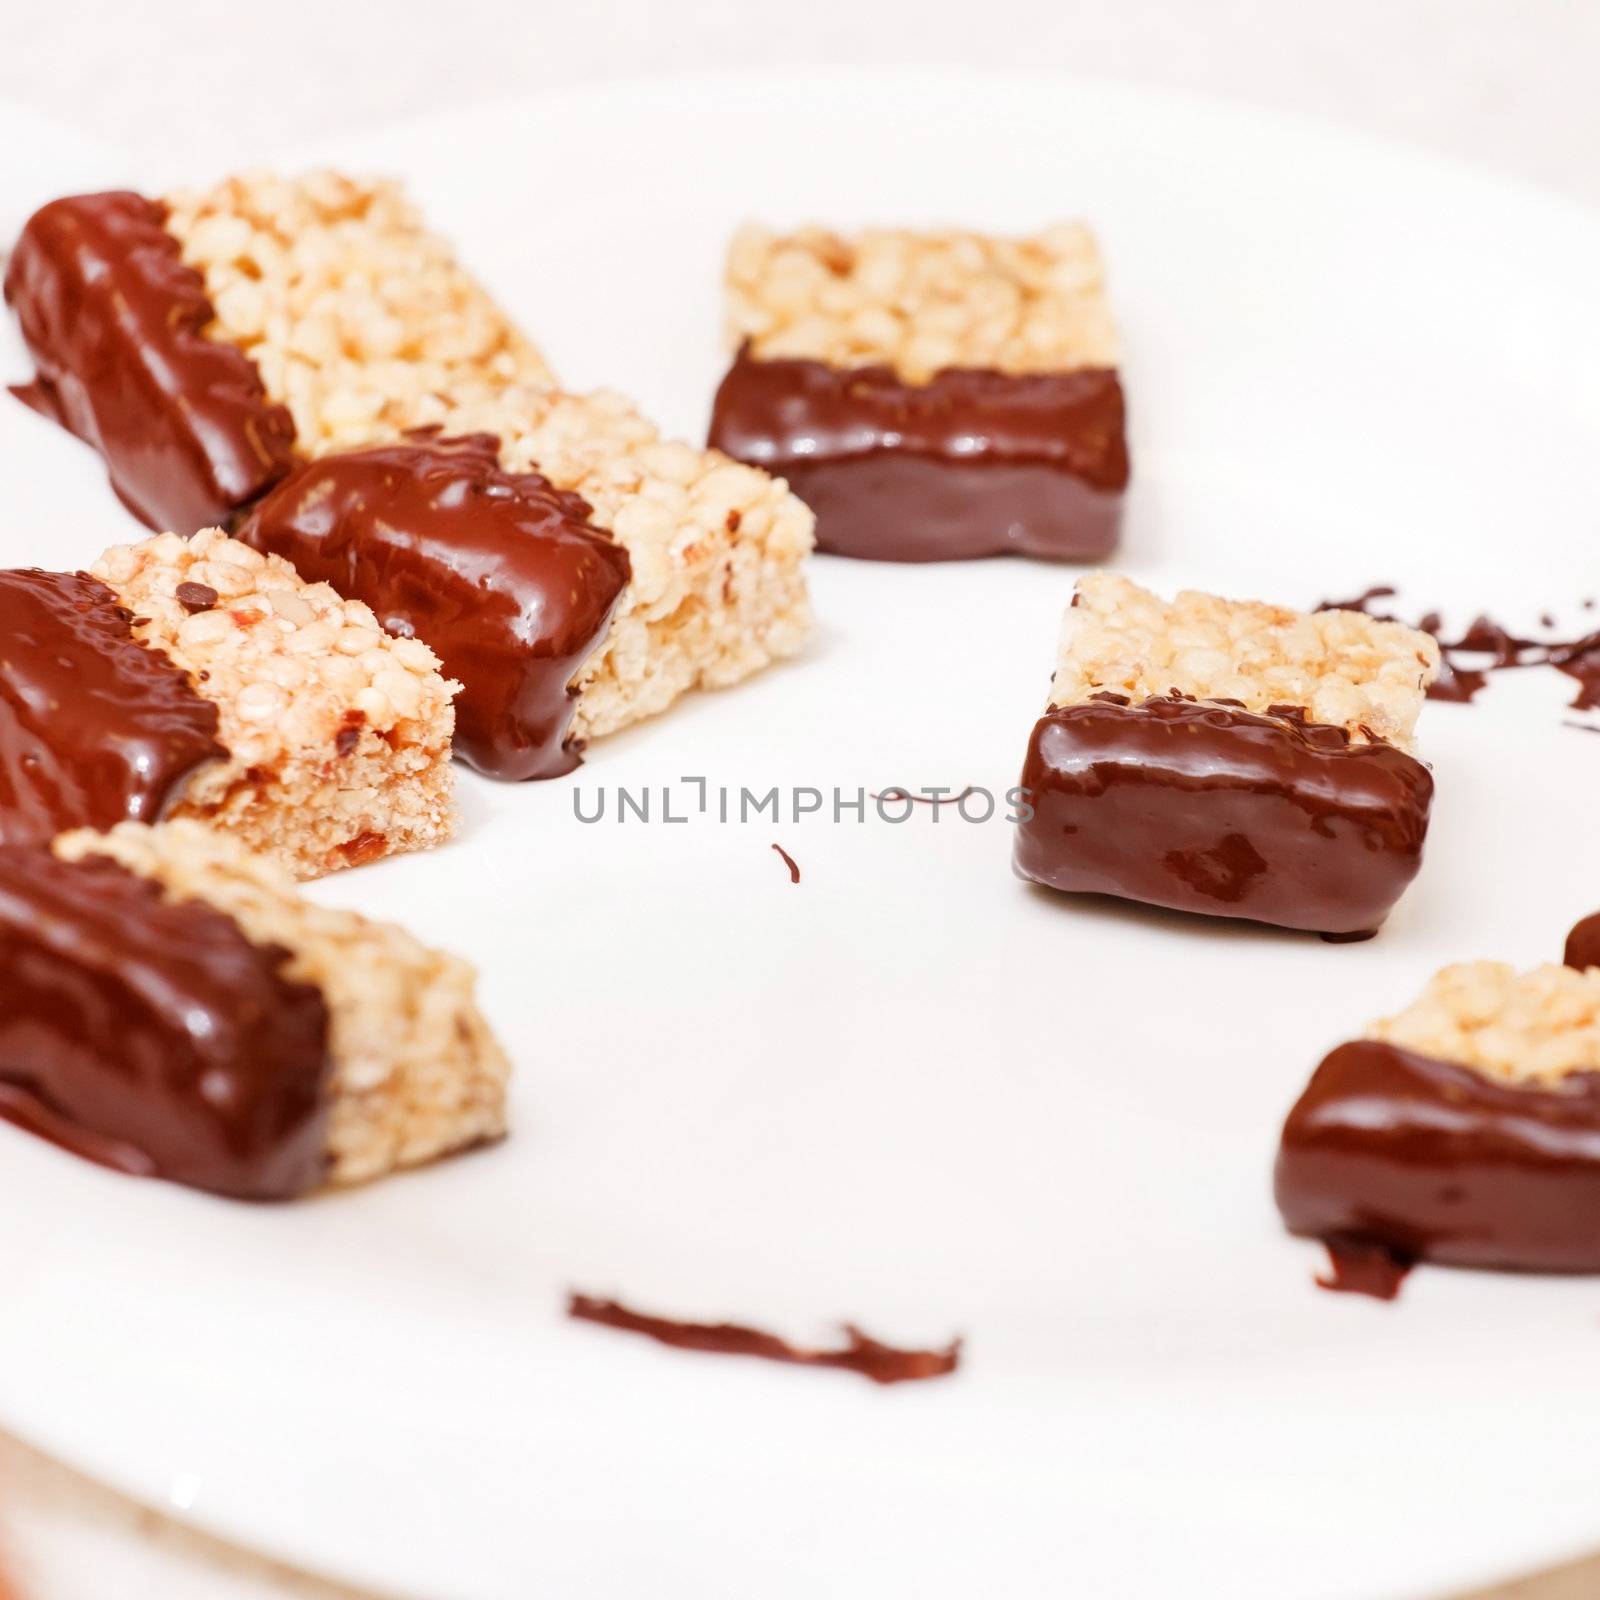 granola bars with chocolate by shebeko